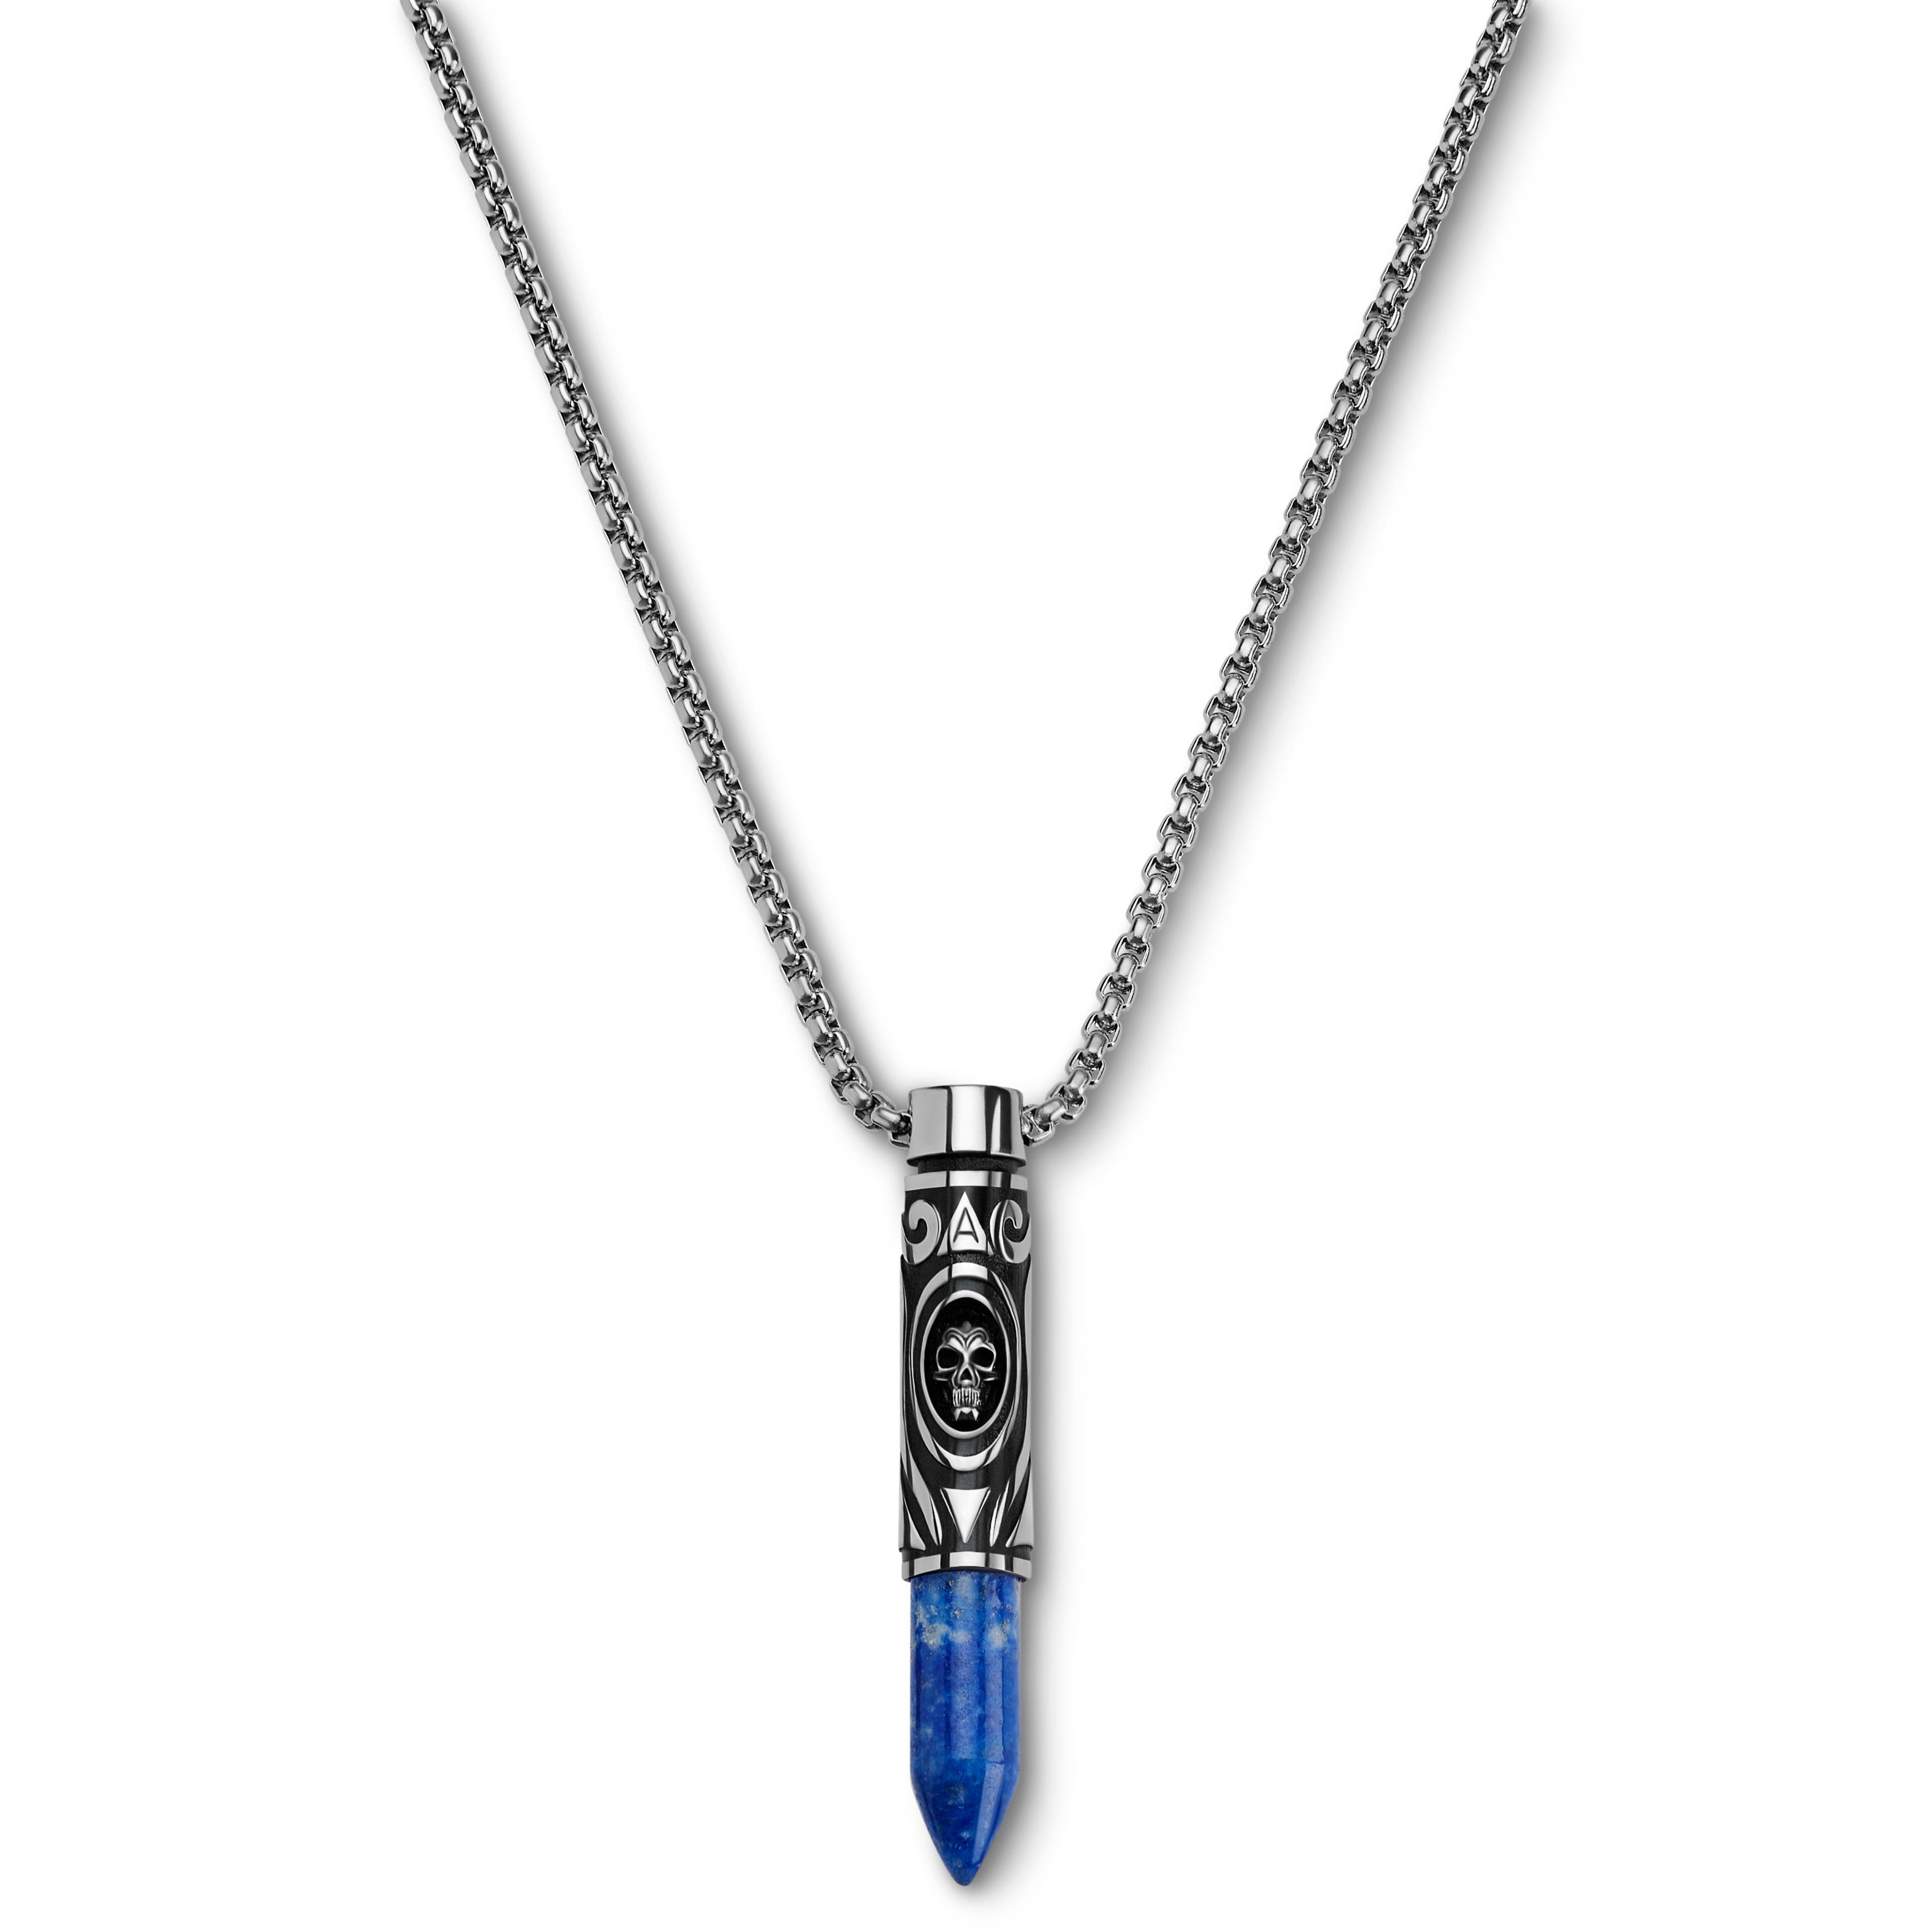 Rico | Silver-tone Stainless Steel & Lapis Lazuli Bullet Necklace